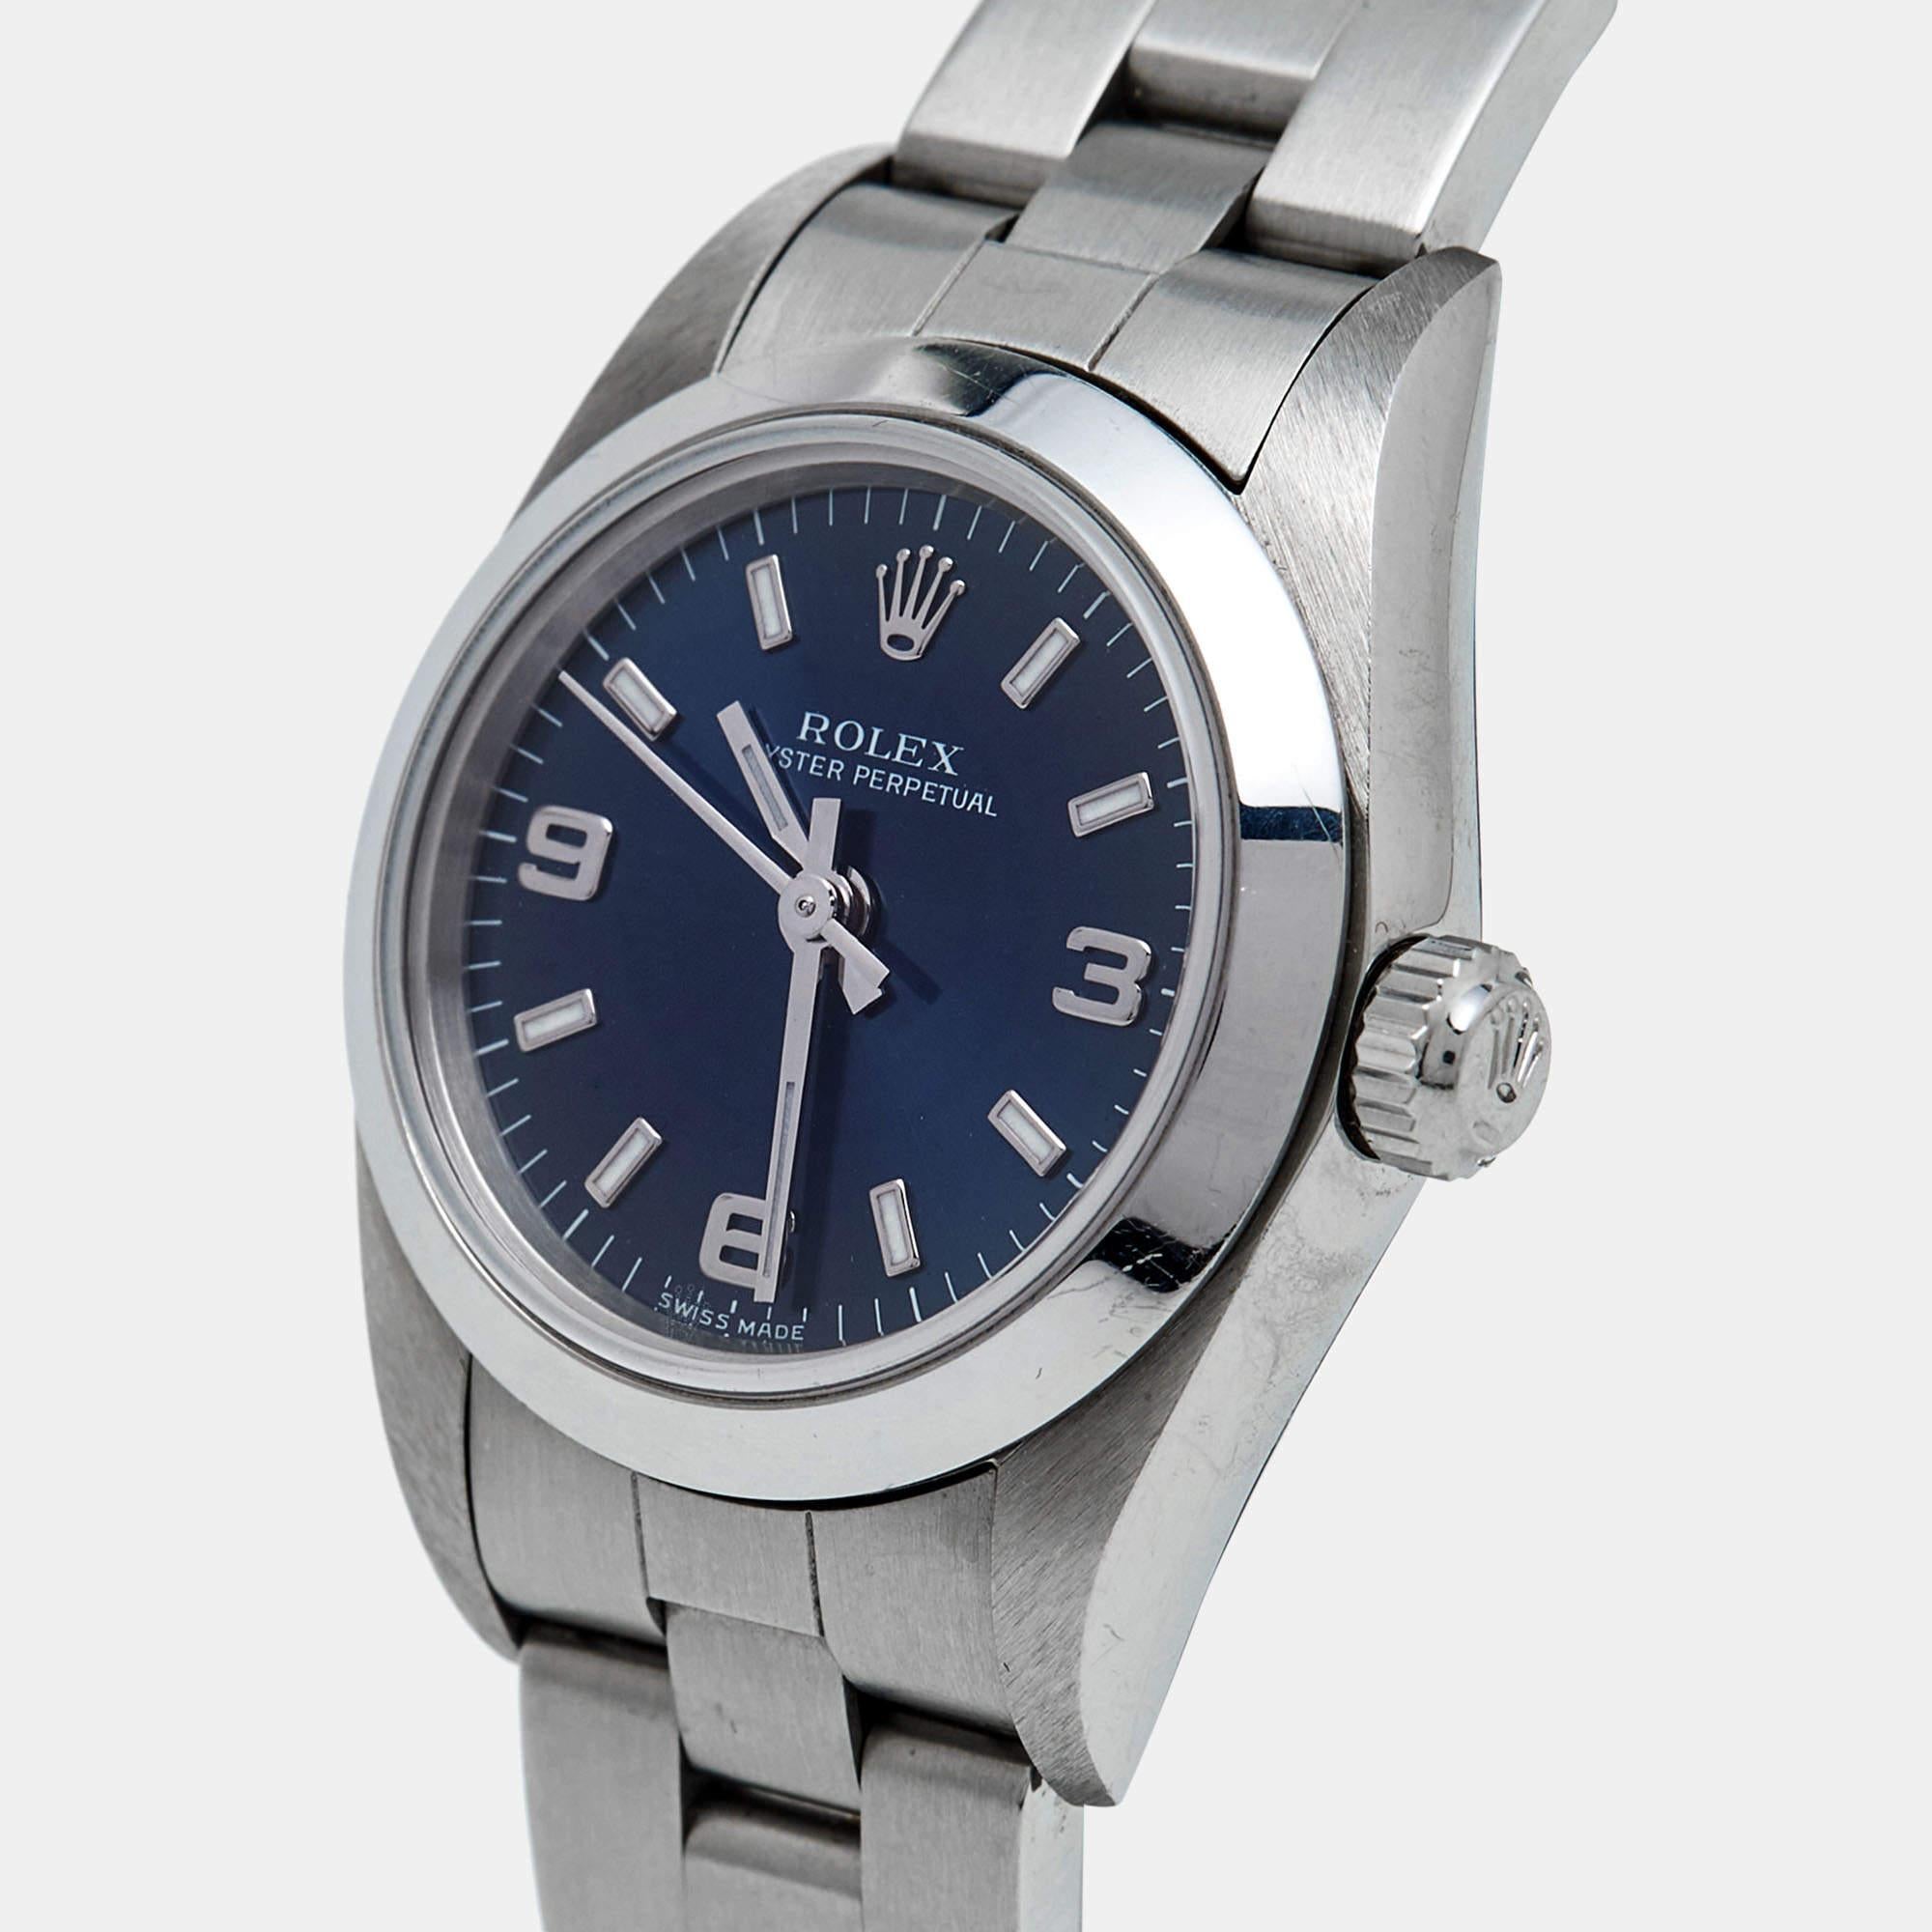 Exhibiting a classic appeal, this Oyster Perpetual 76080 Automatic Wristwatch from the house of Rolex is a fine example of elevated style. This stainless steel watch features a smooth bezel and a distinct blue dial with elegant hour markers and